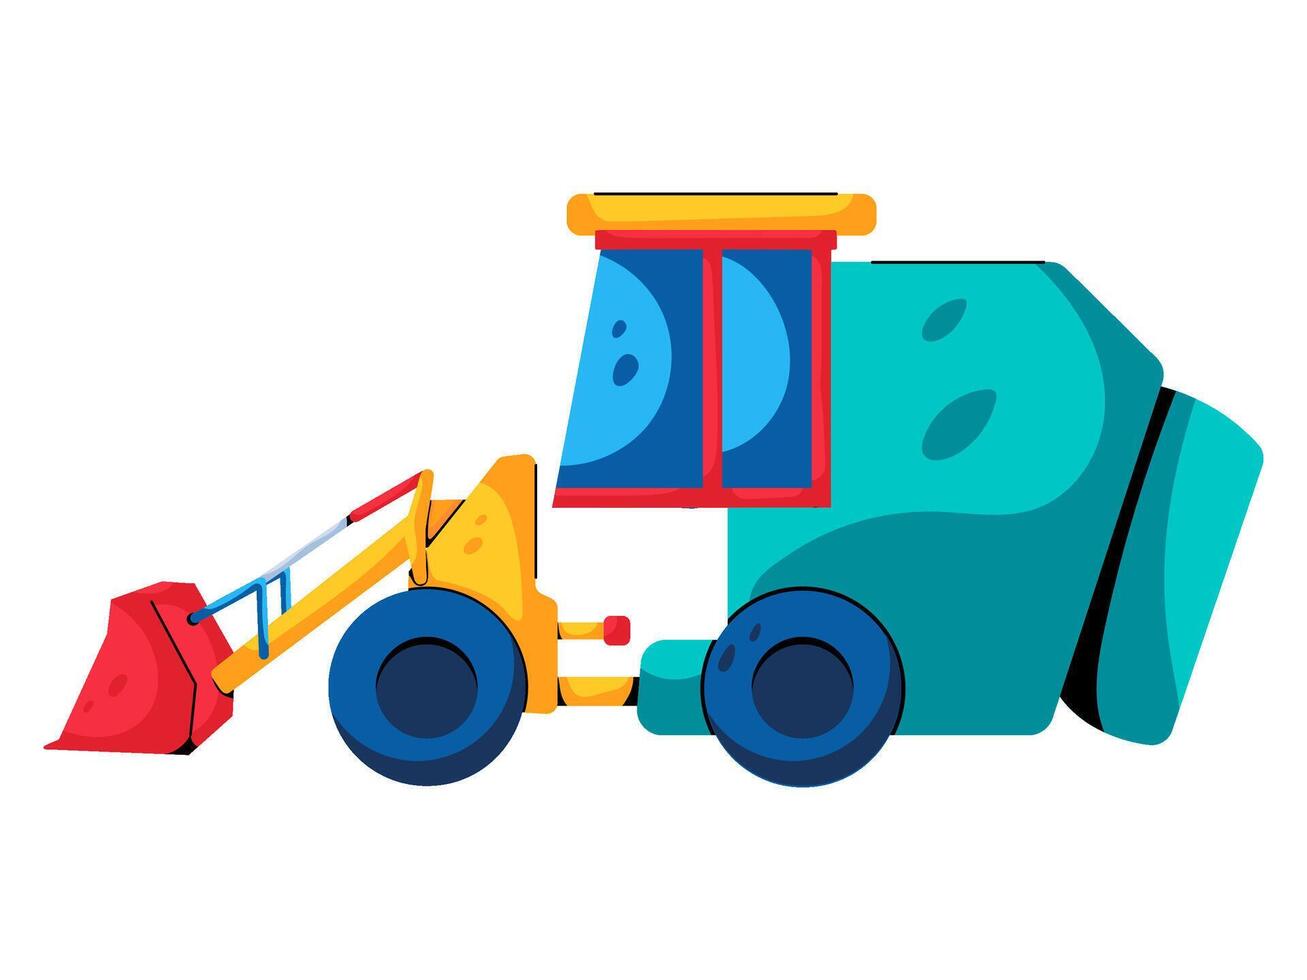 tractor design with modern illustration concept style for badge farm agriculture sticker illustration vector